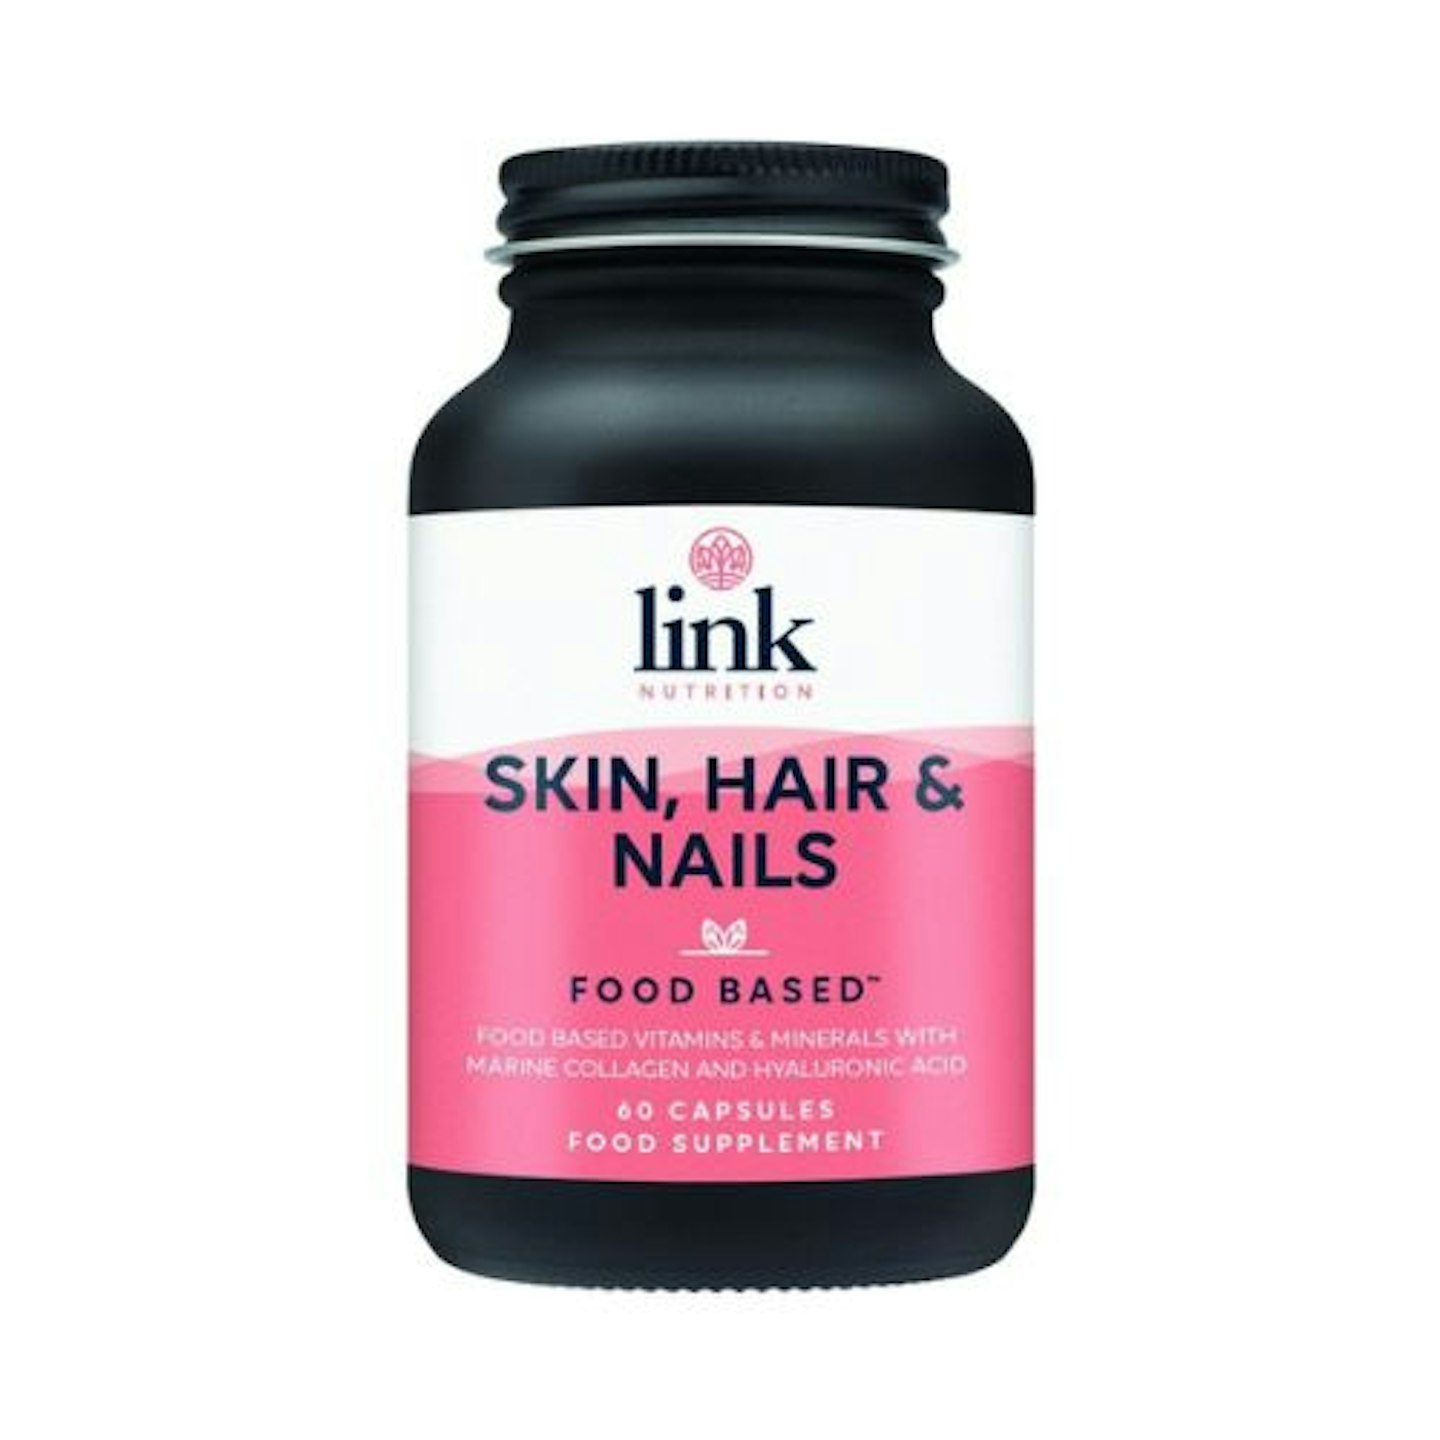 Link Nutrition Skin, Hair and Nails Capsules